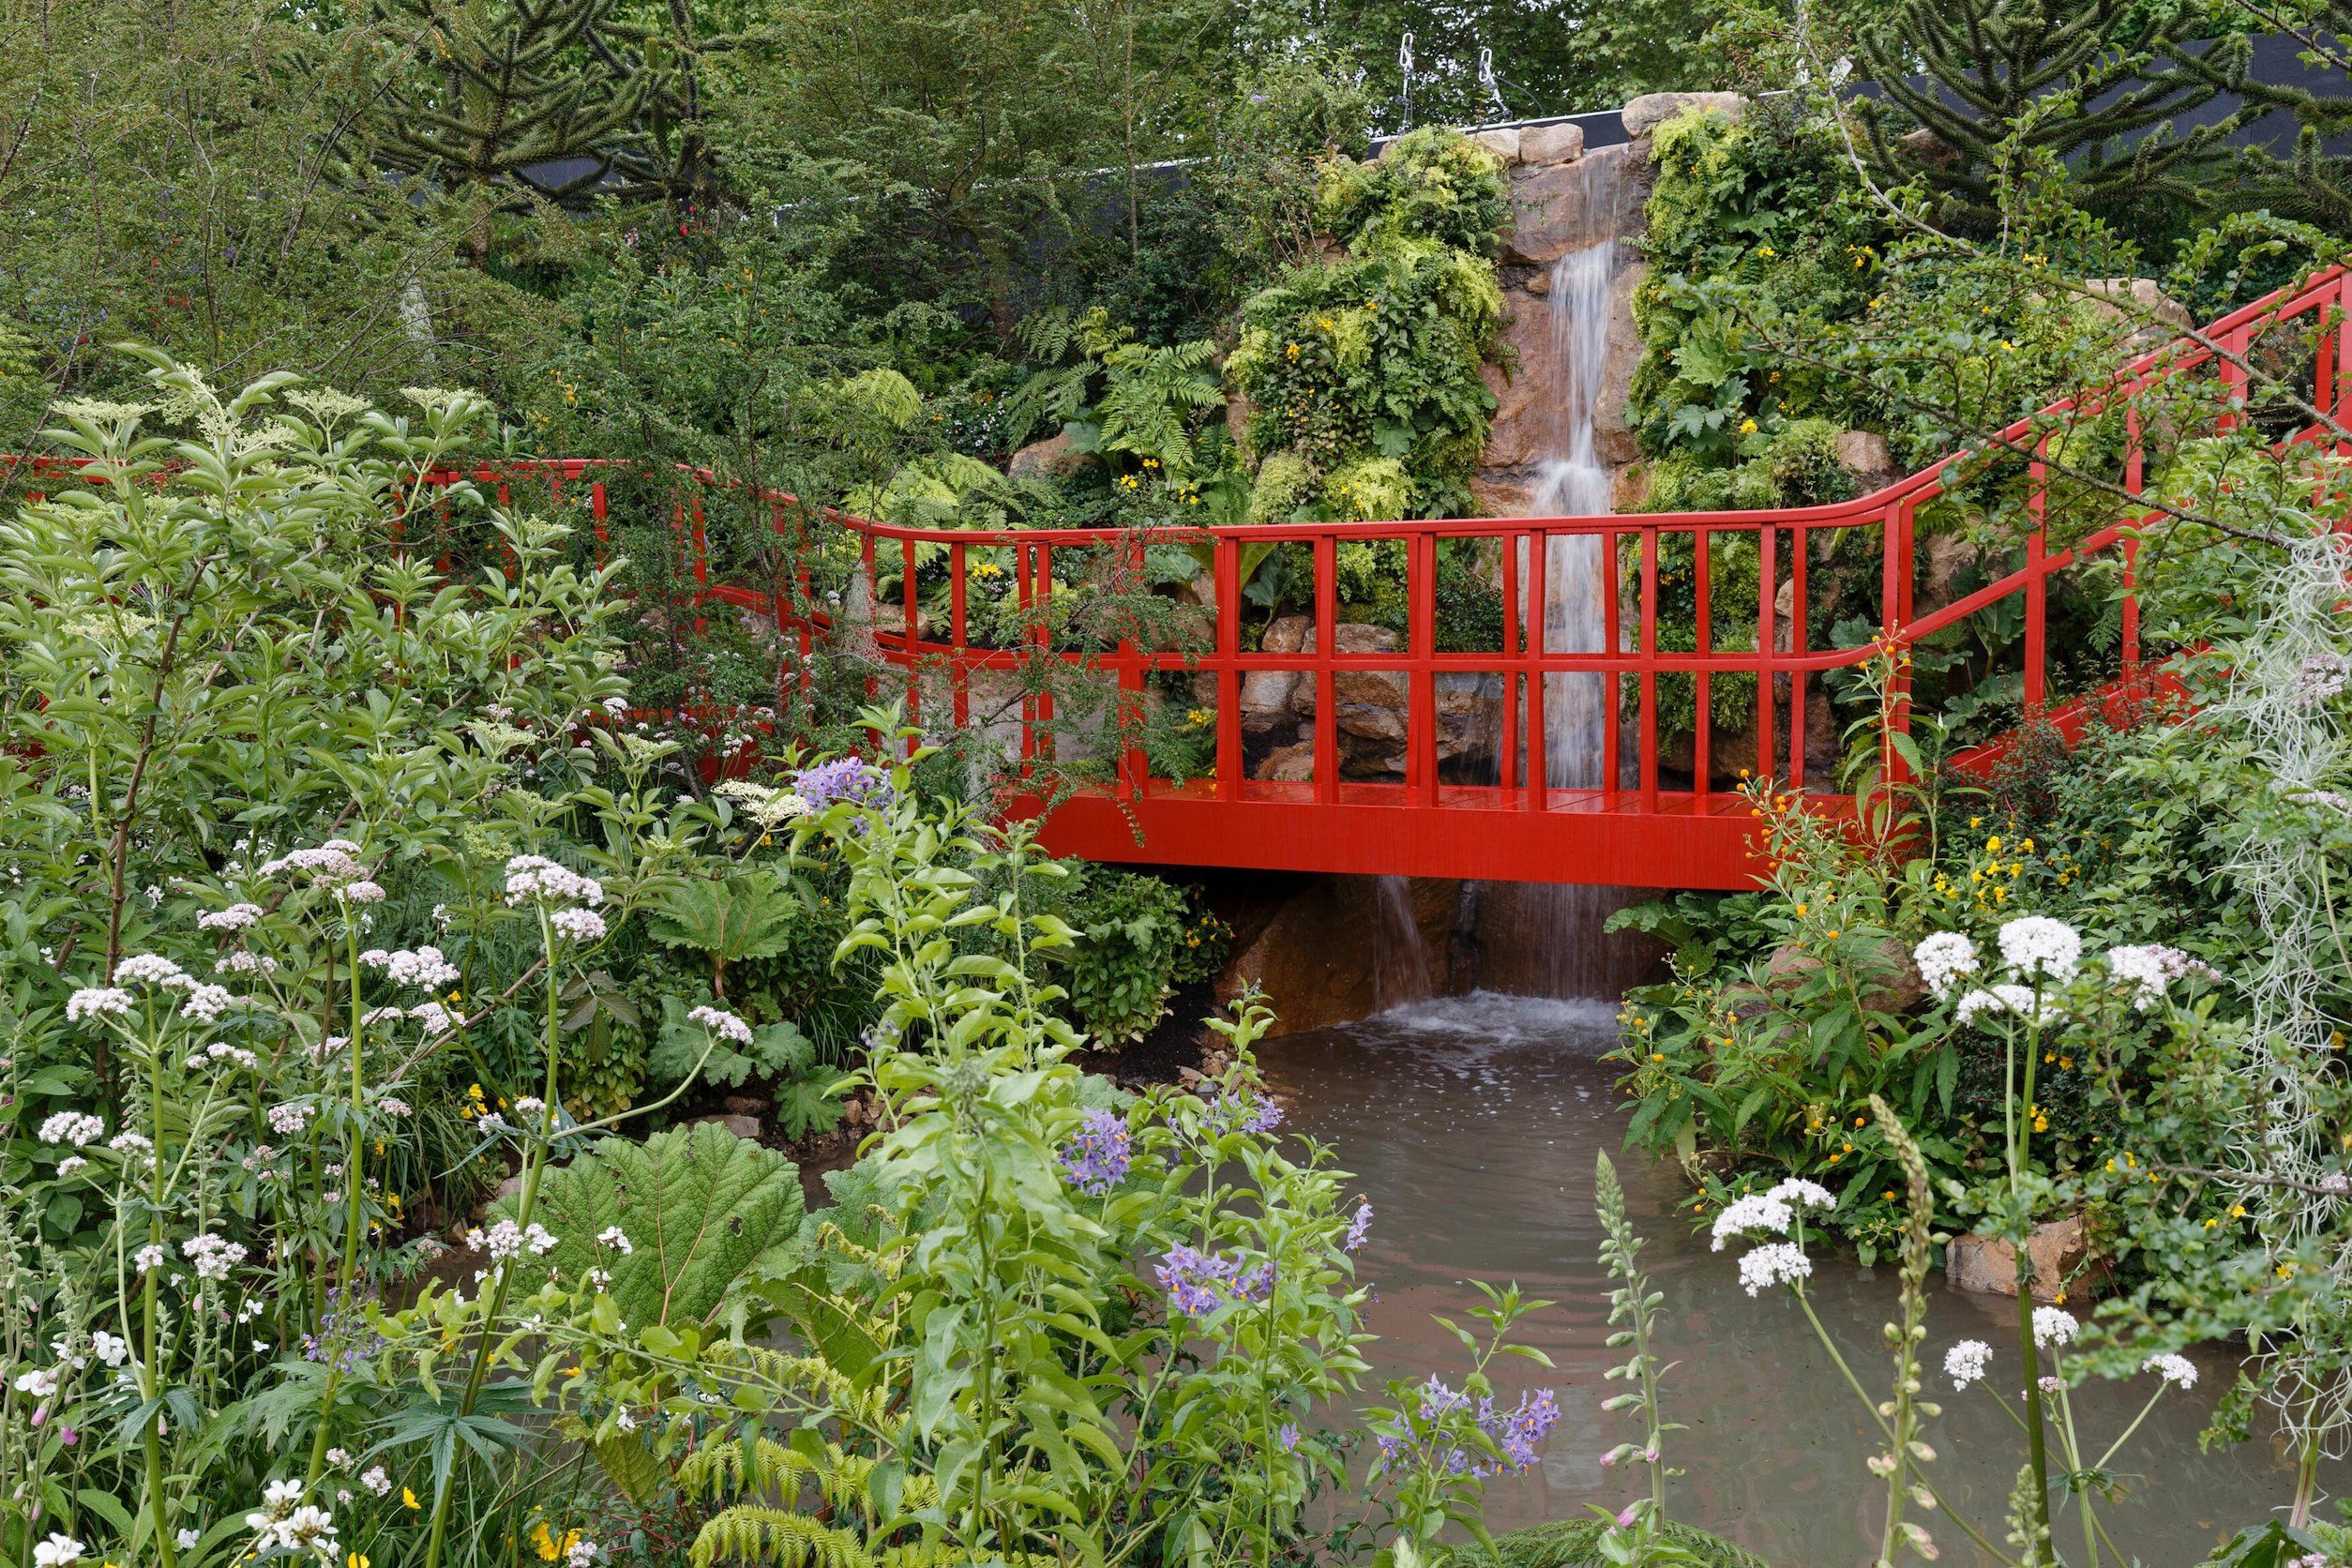 chelsea flower show: garden lost points due to wording, reveal judges